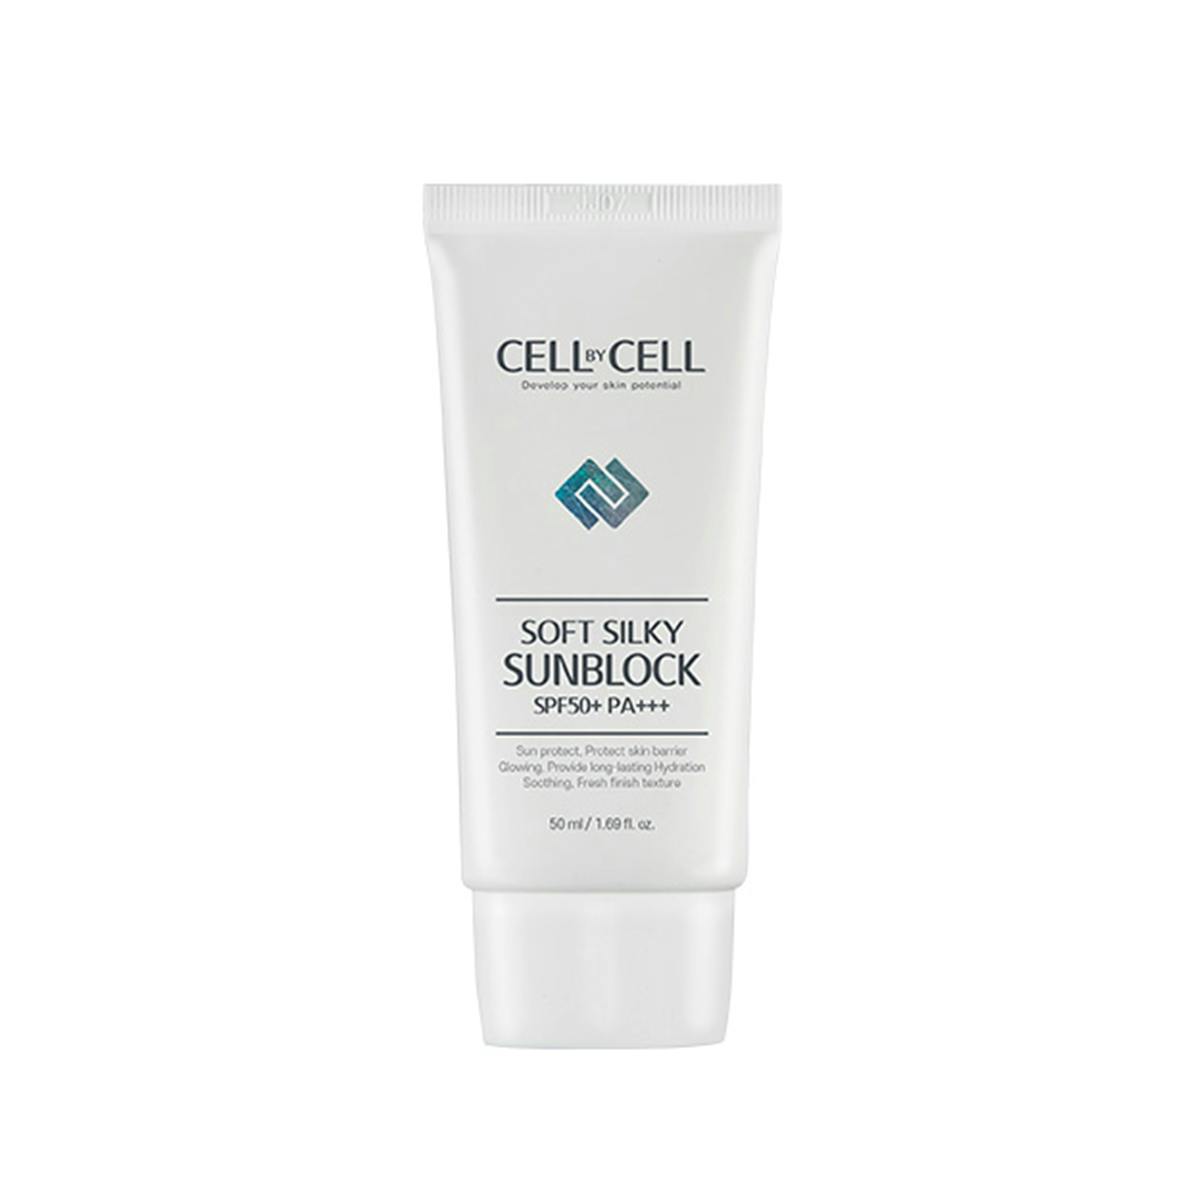 CELL BY CELL - SOFT SILKY SUN BLOCK, SPF50+ PA+++ / 50 ml.